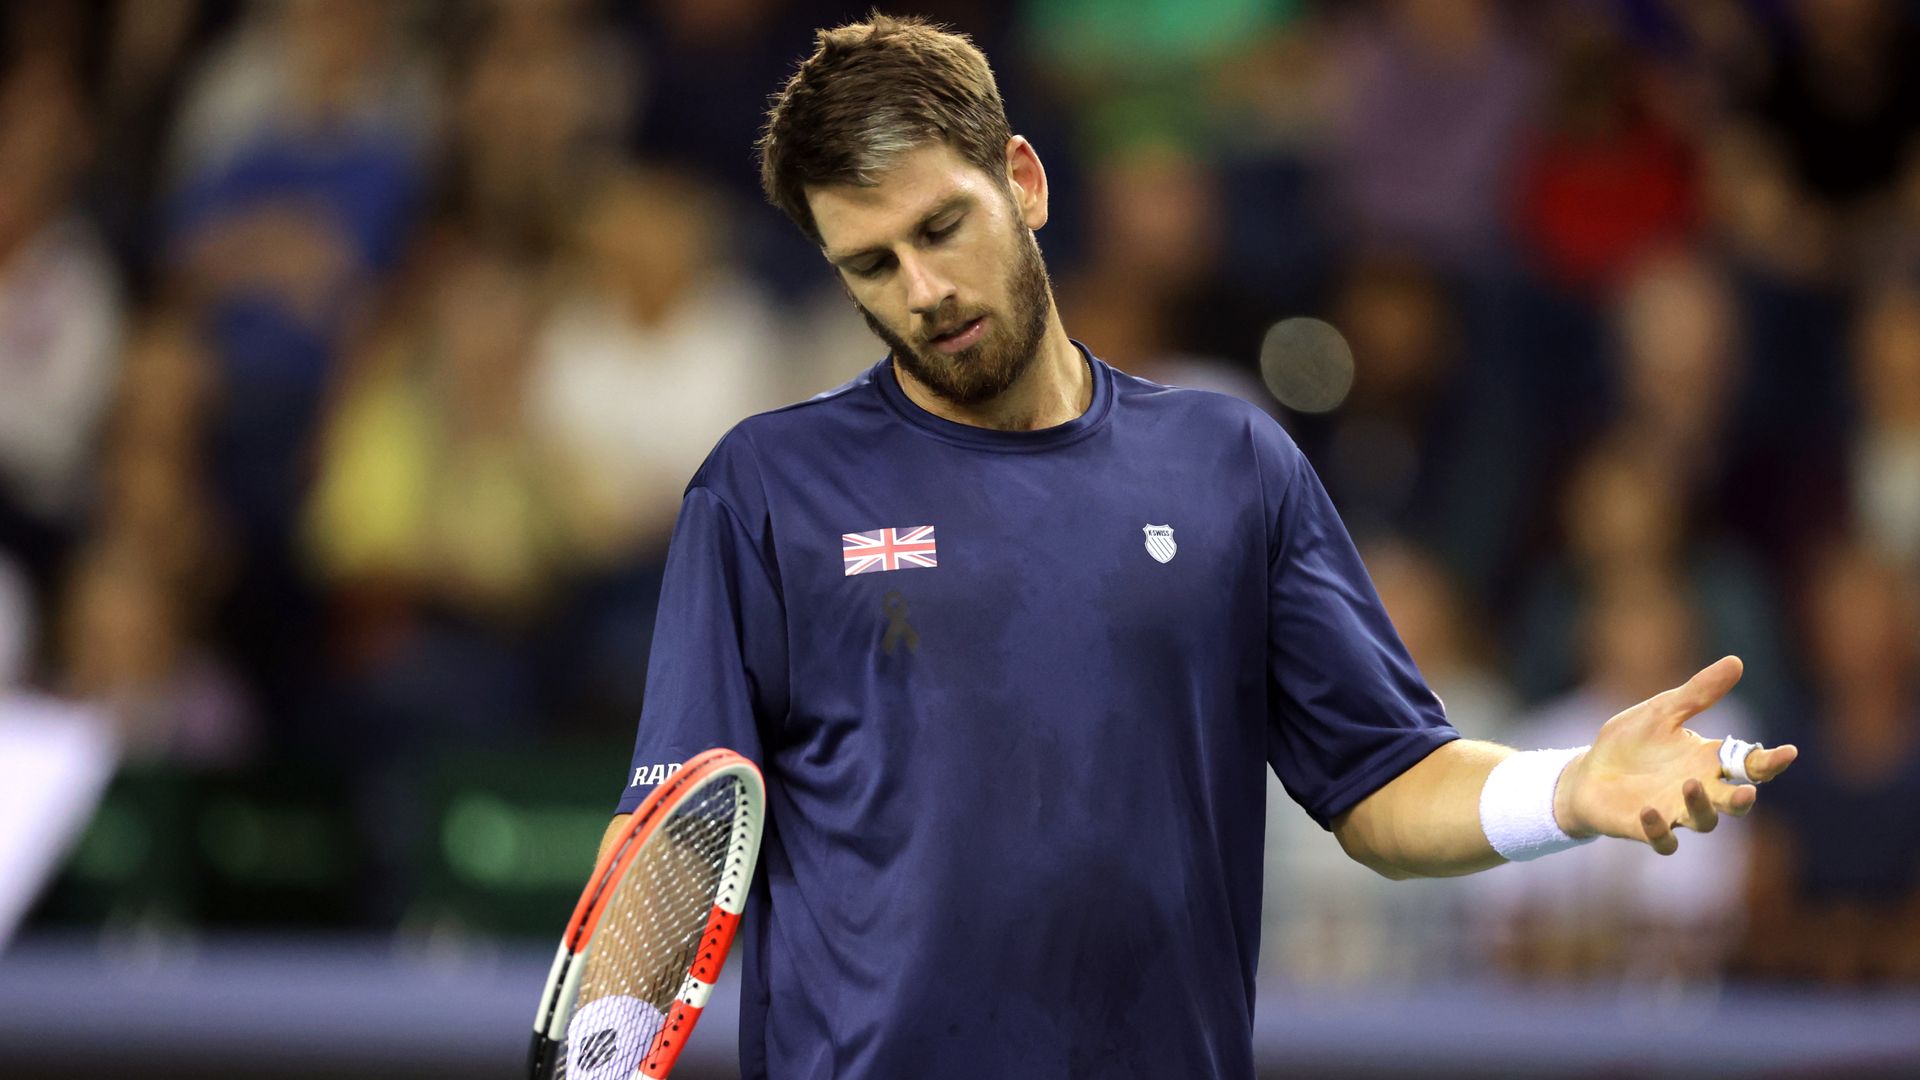 Norrie pulls out of Korea Open quarter-final after testing positive for Covid-19